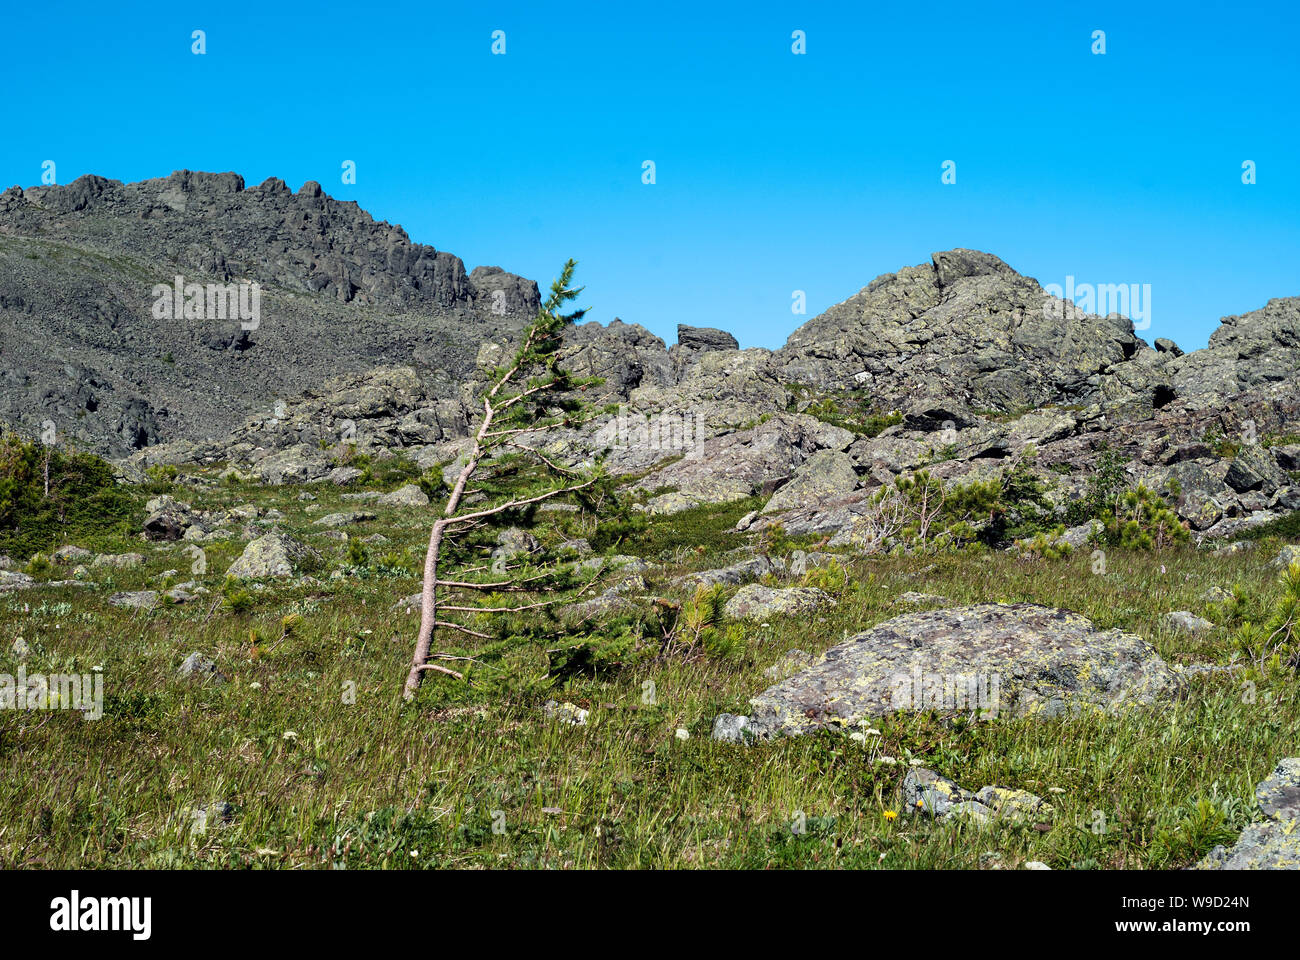 high-mountainous subnival tundra landscape with wind-bent mountain dwarf larch Stock Photo